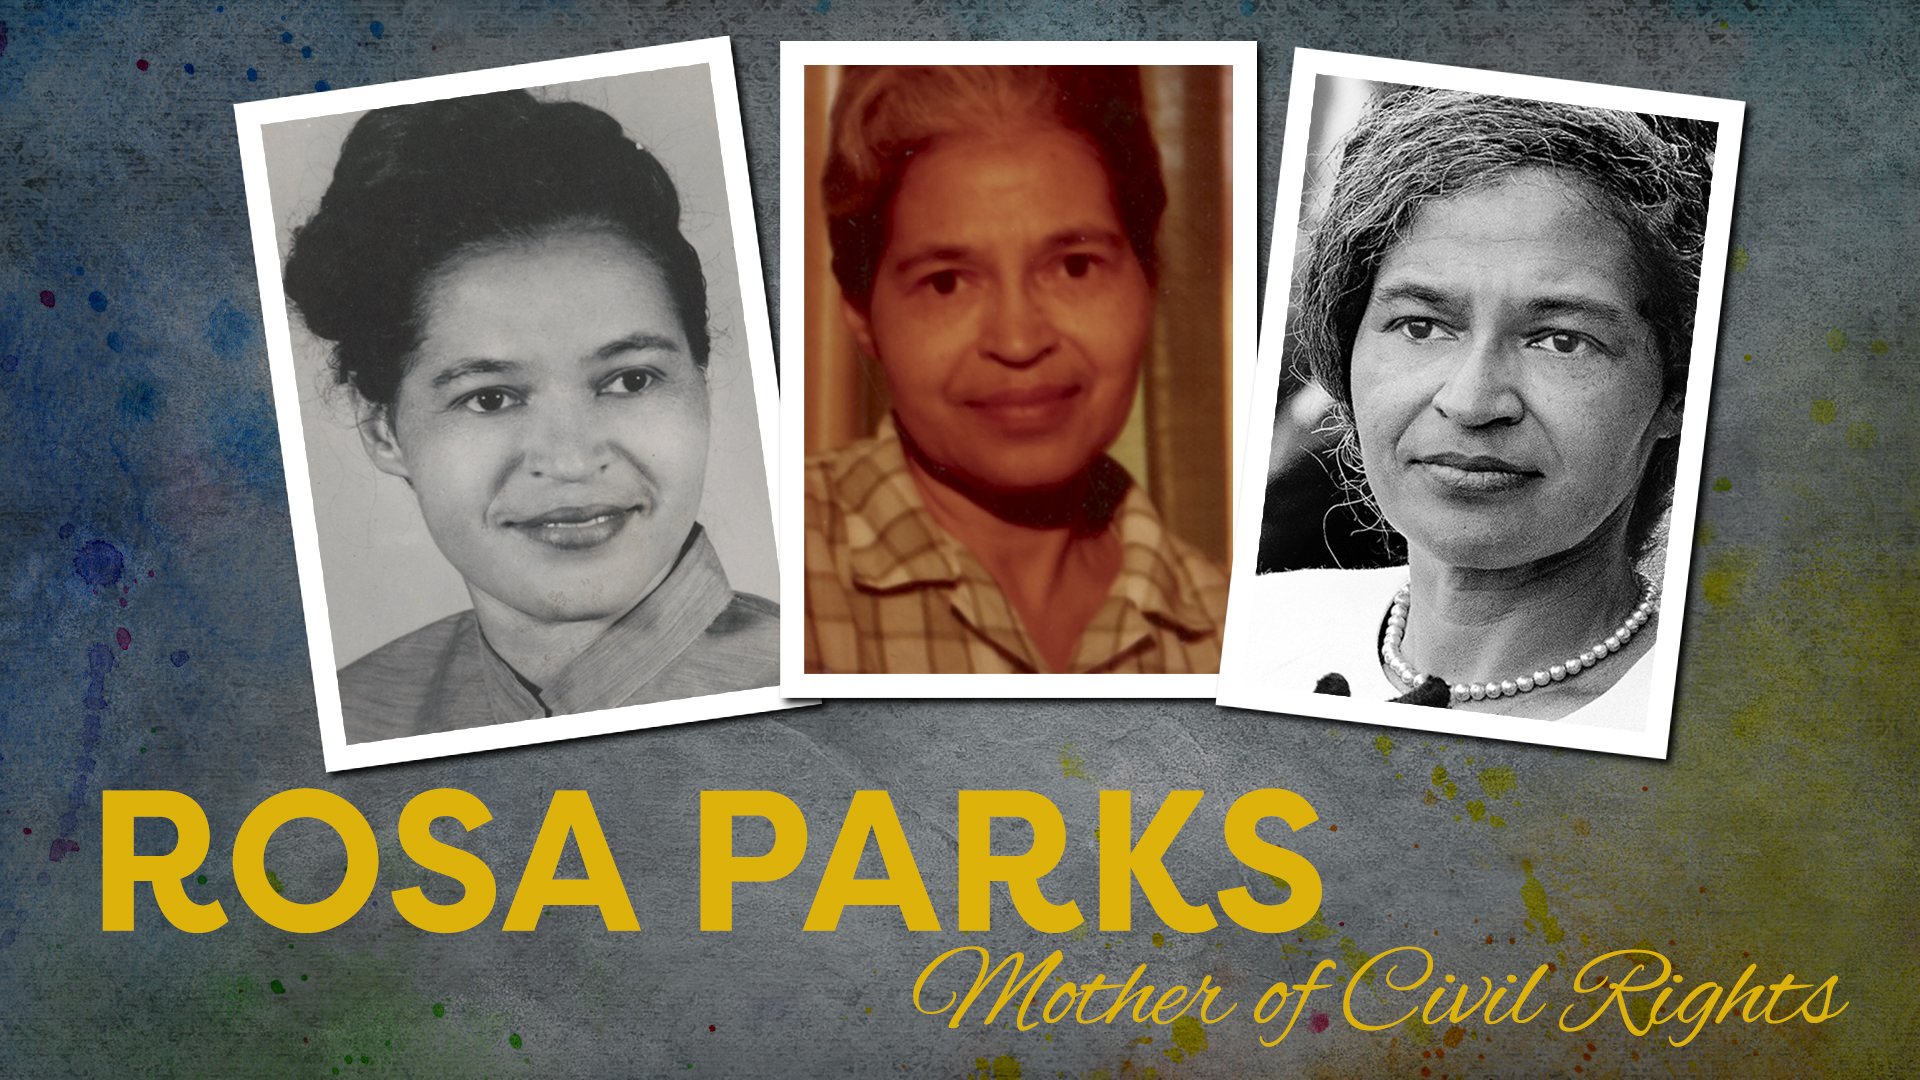 Three photos of Rosa Parks. Rosa parks, Mother of Civil Rights